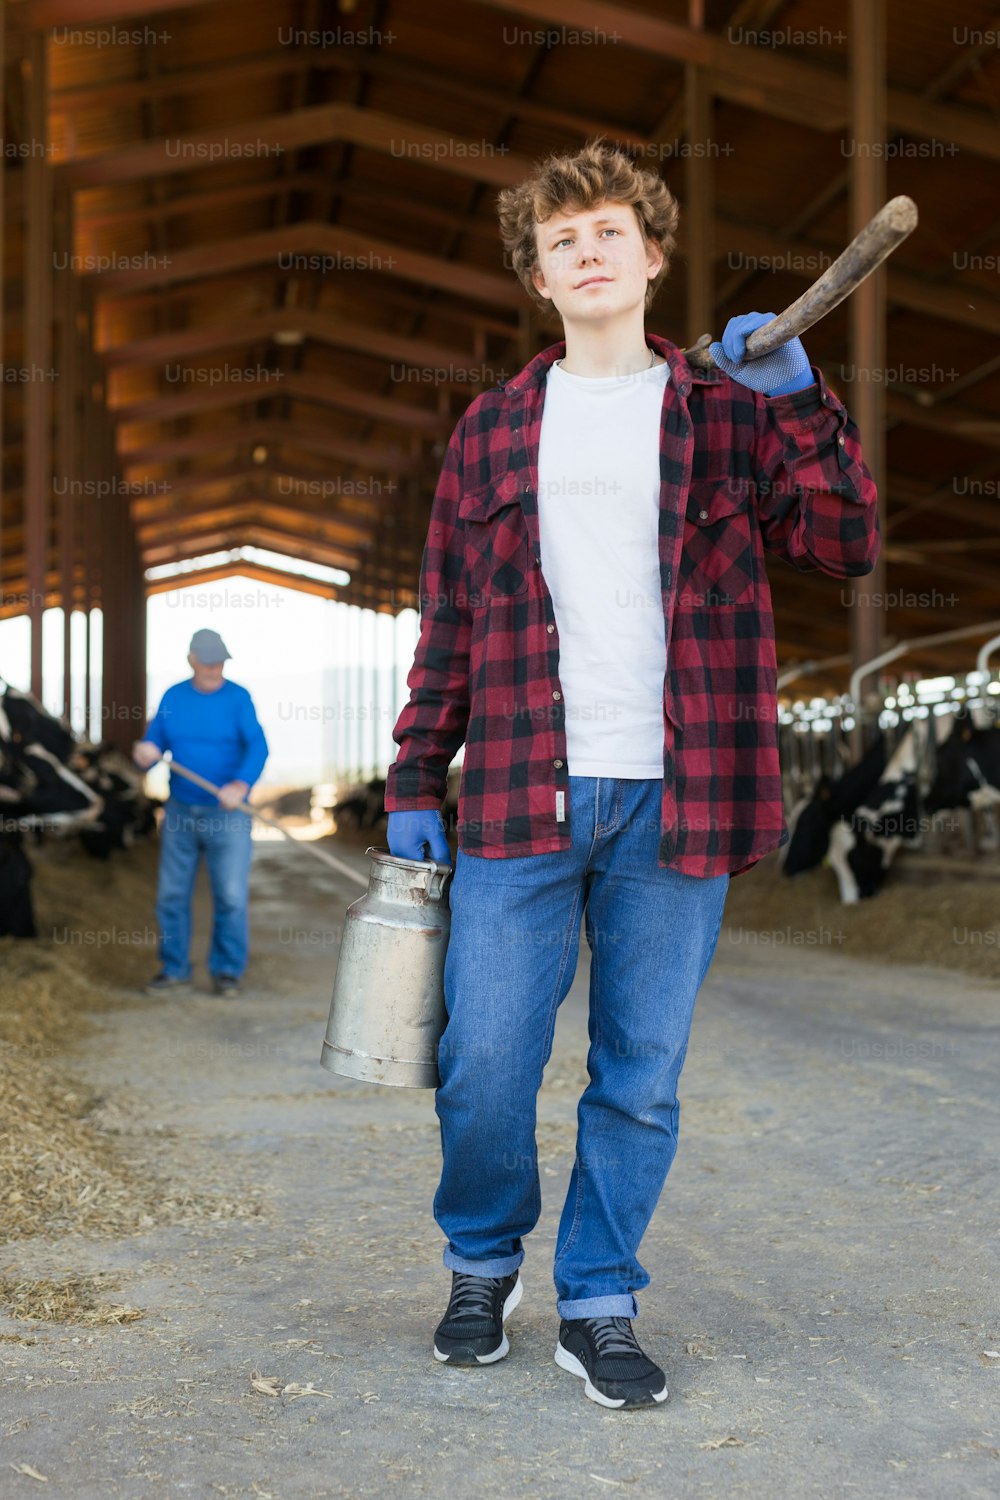 Confident teenage farm worker walking through cowshed after work on background of stall with cows, carrying pitchforks and milk can